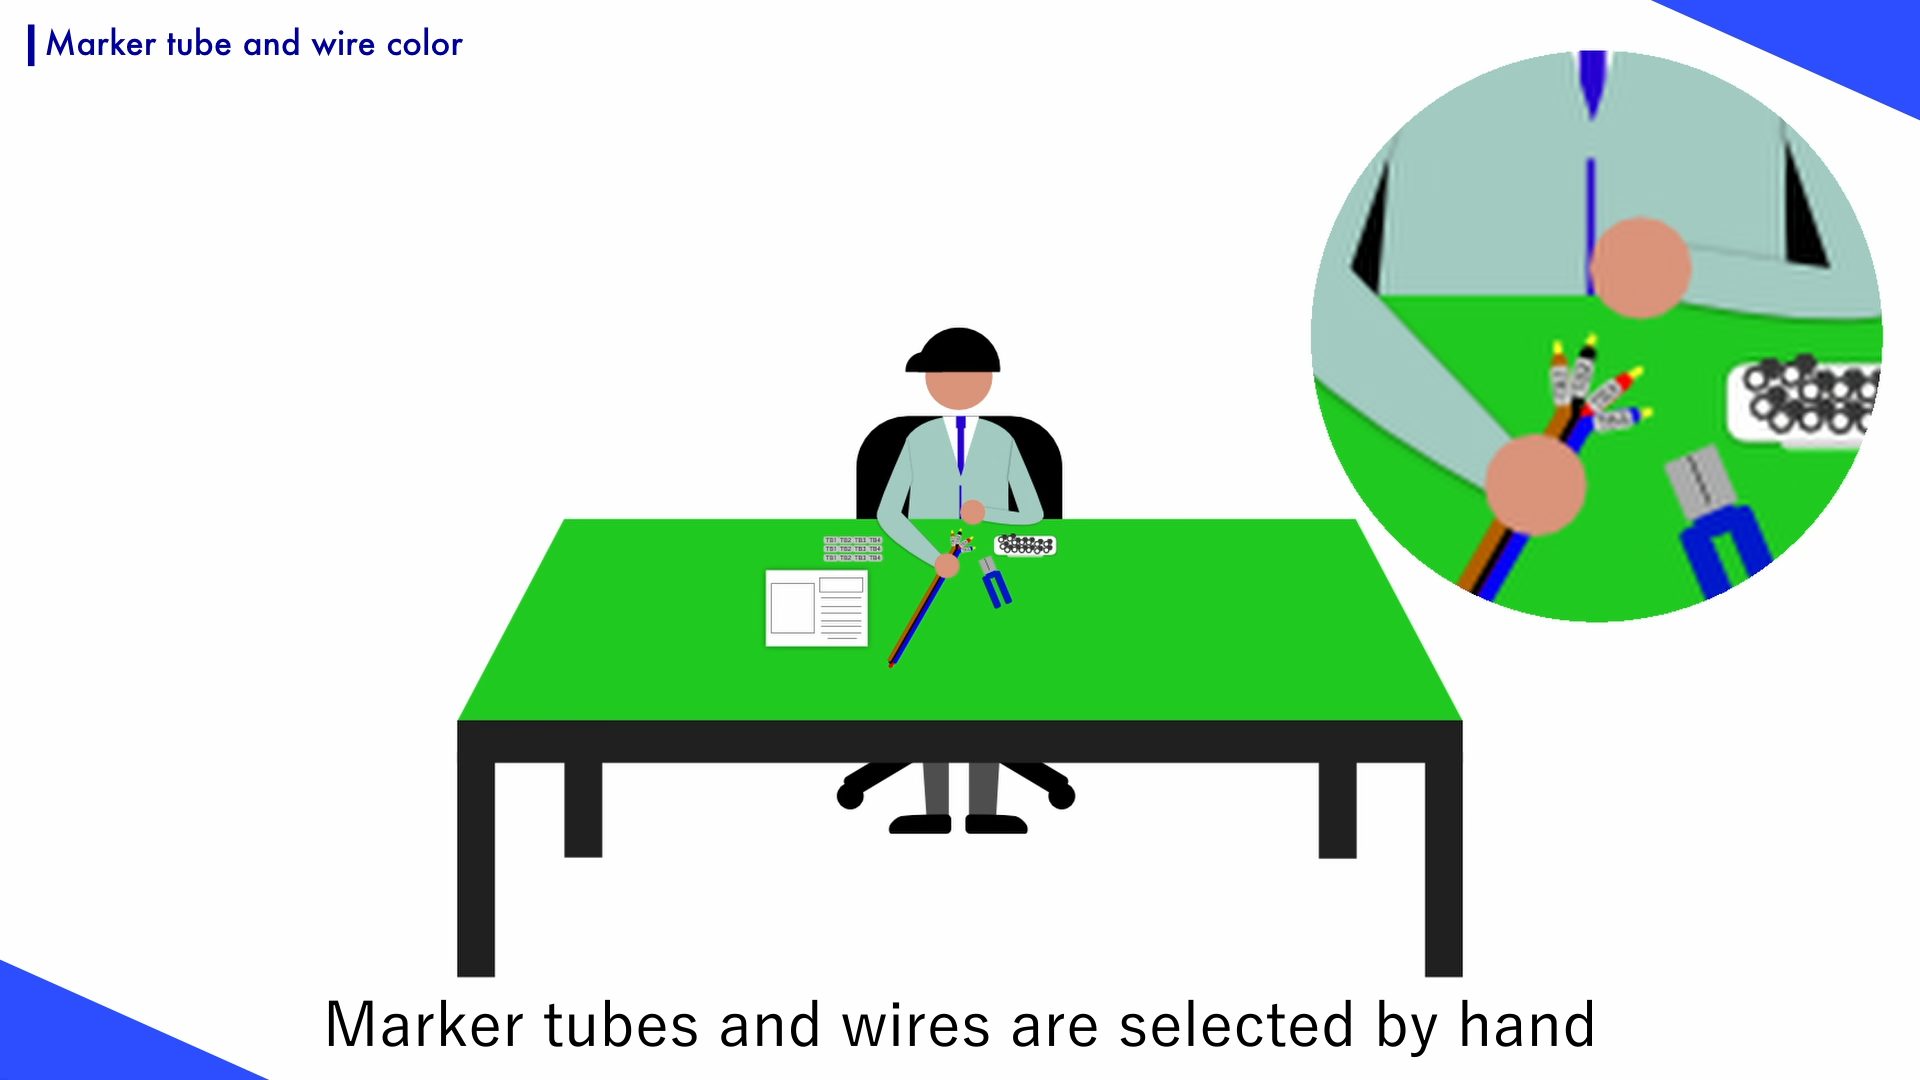 Marker tubes and wire colors for wiring harnesses are selected by the operator.